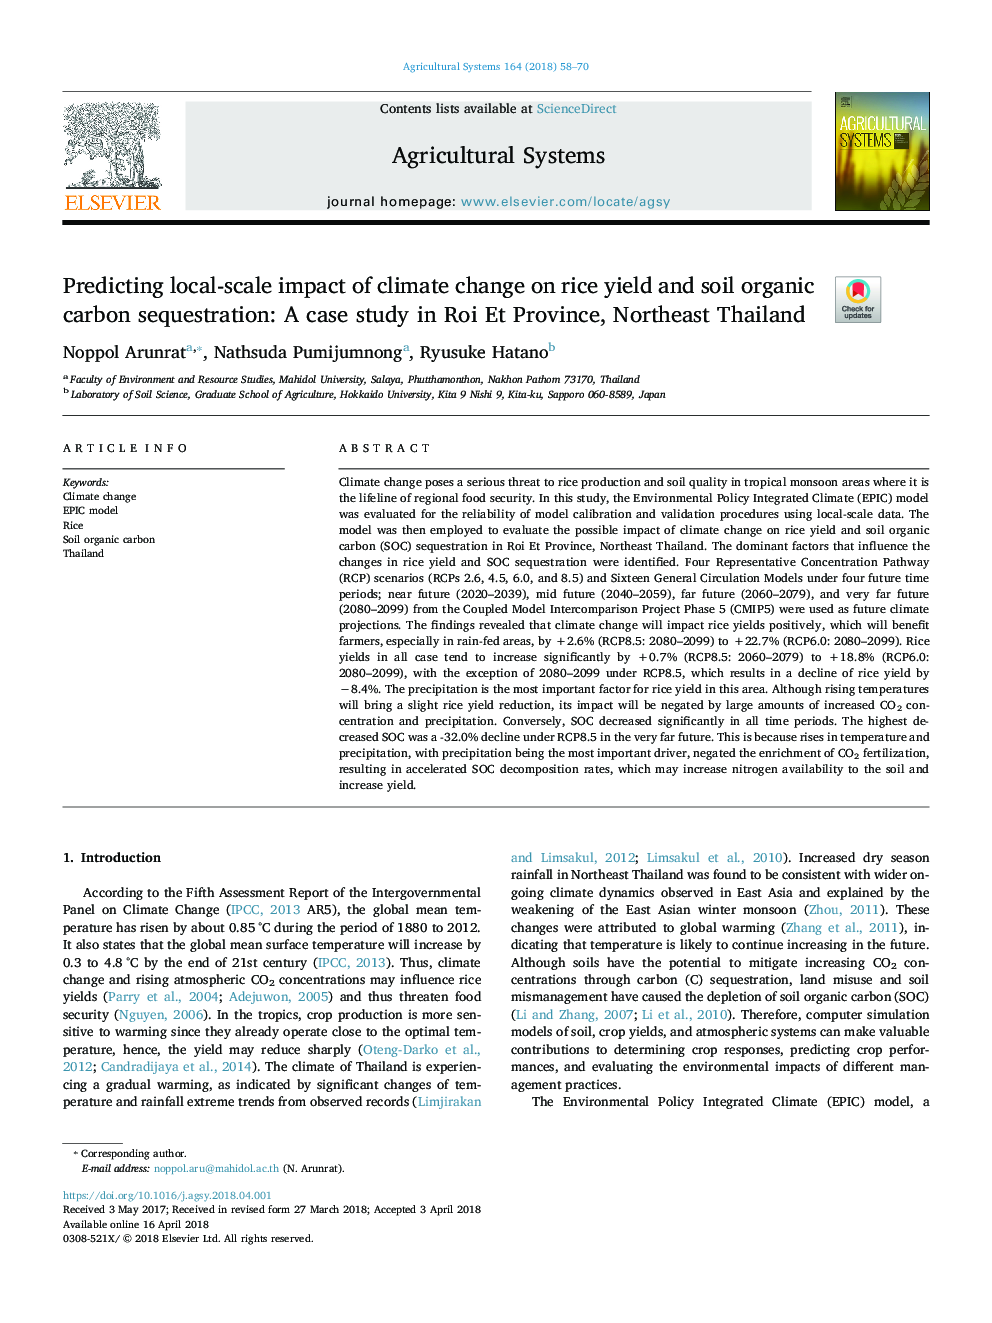 Predicting local-scale impact of climate change on rice yield and soil organic carbon sequestration: A case study in Roi Et Province, Northeast Thailand